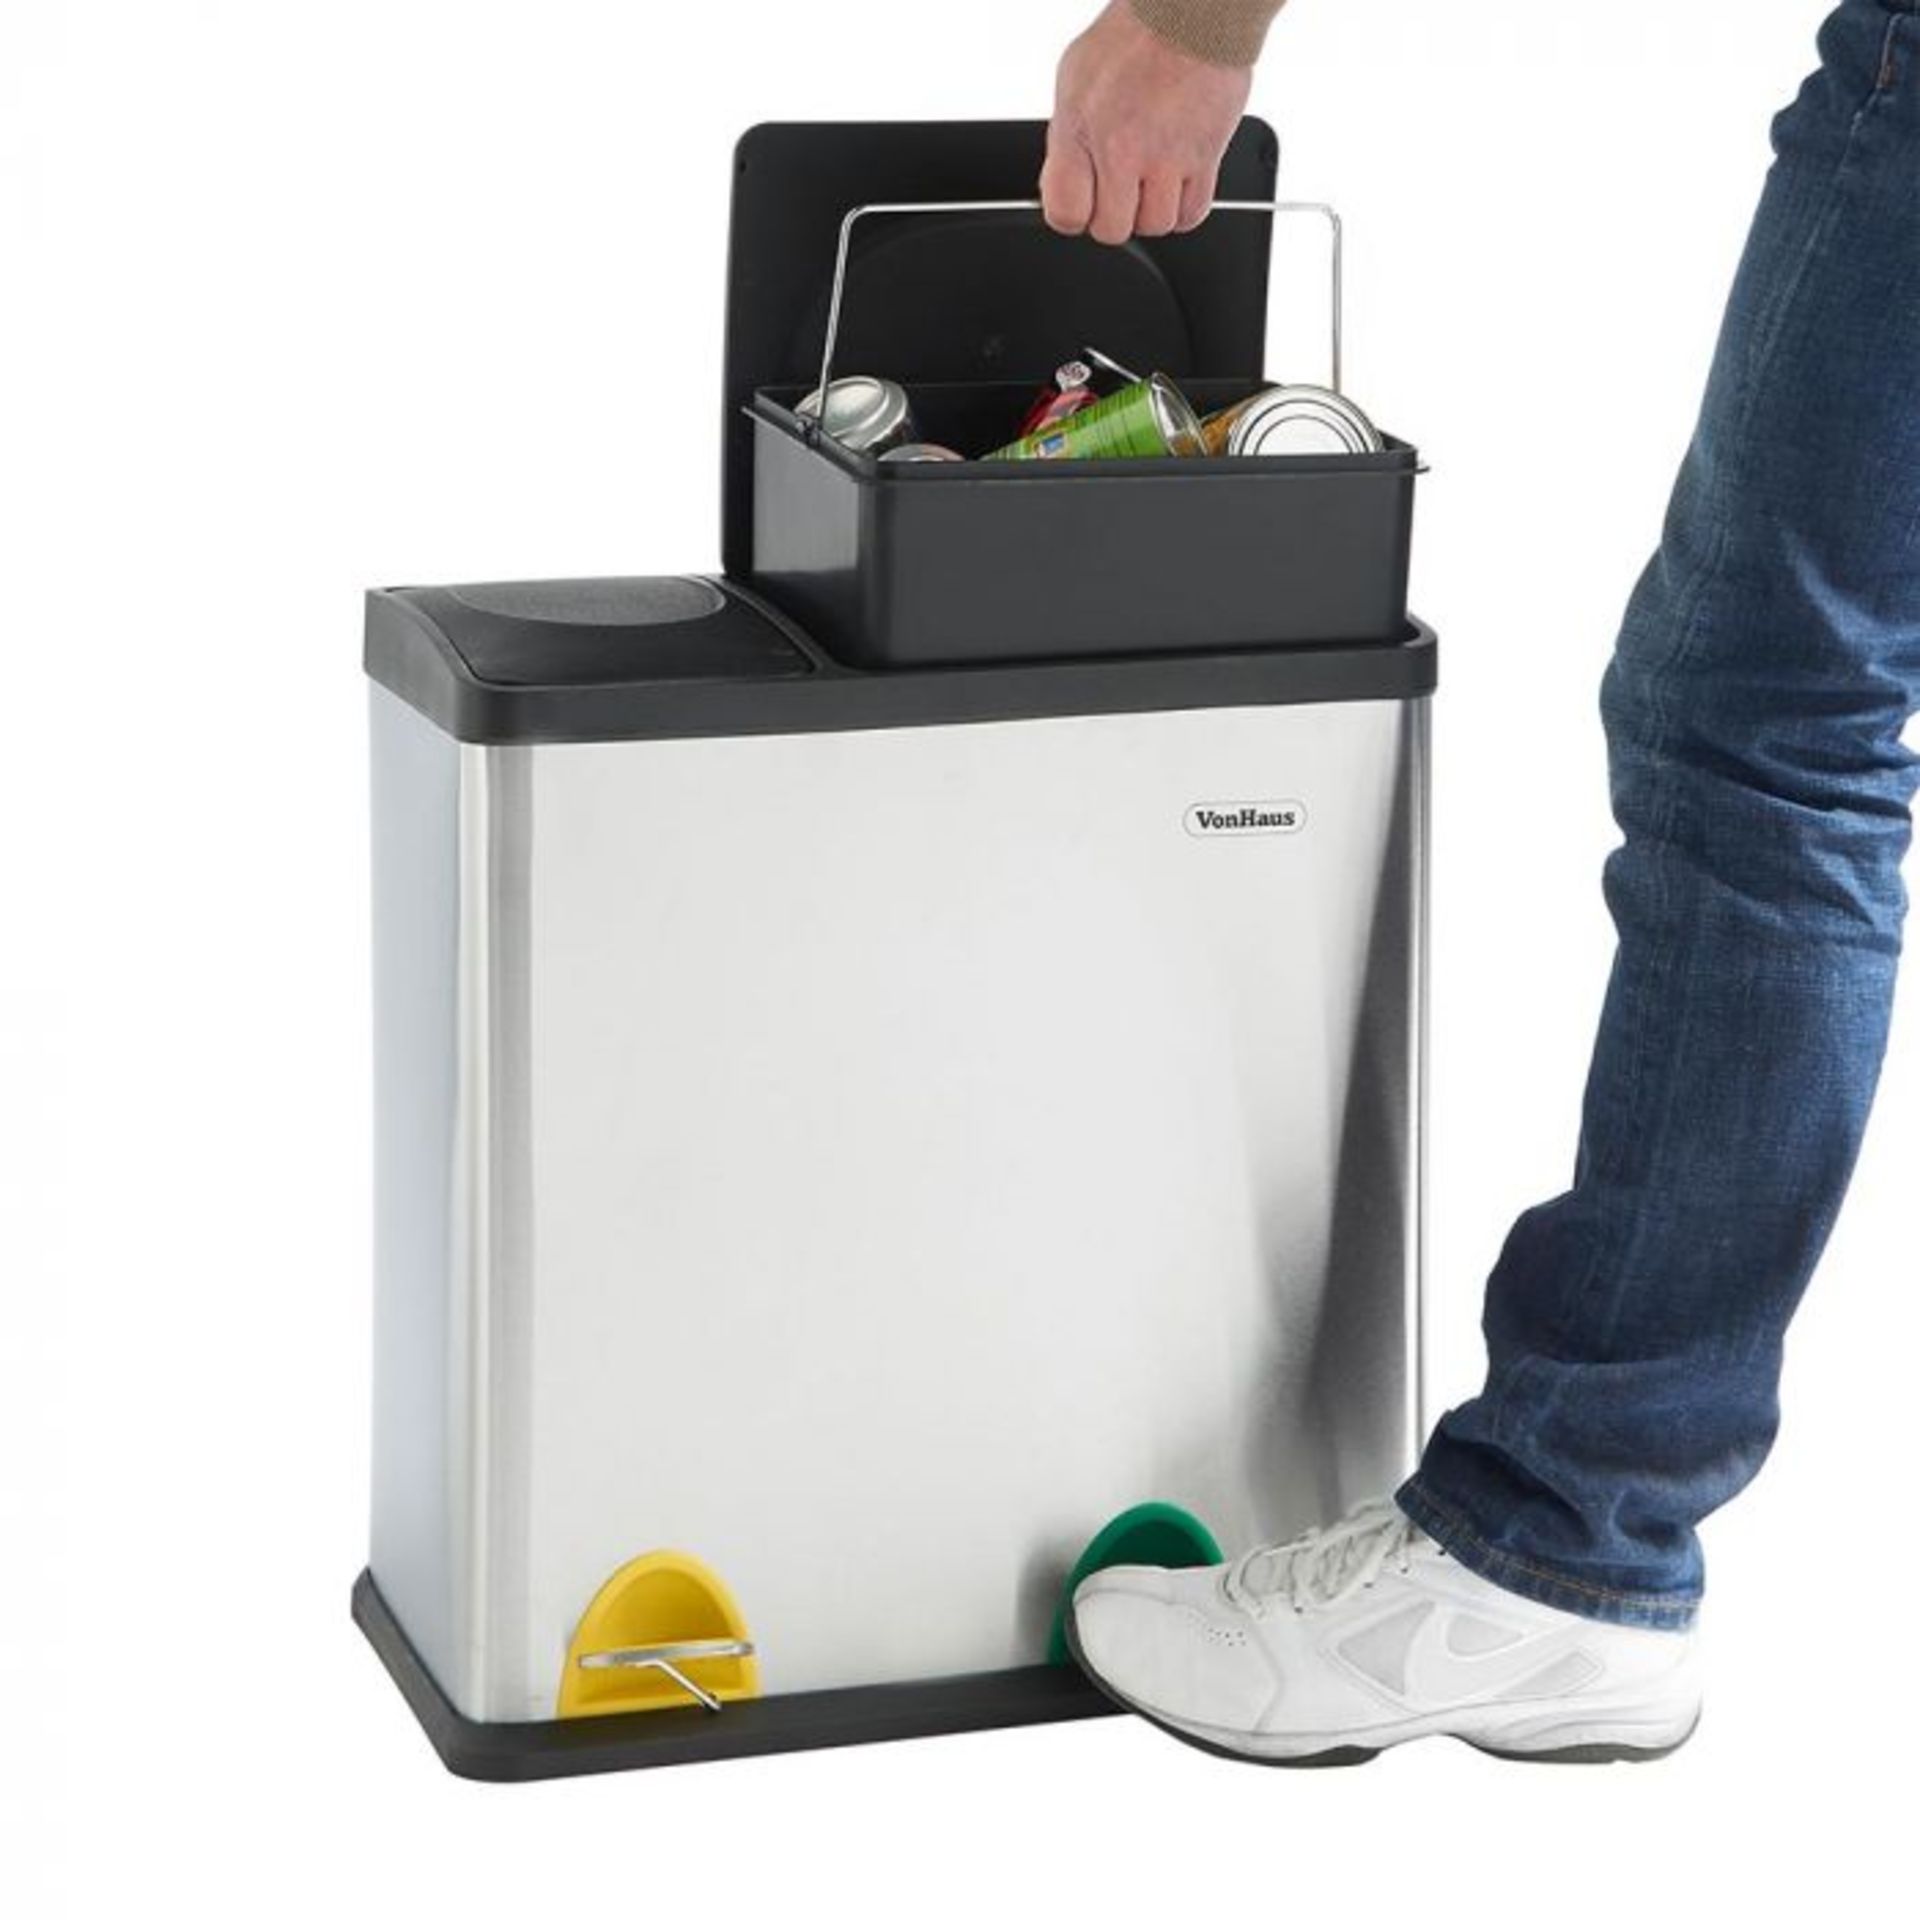 (V101) 6L 2 in 1 Recycling Bin Streamline your recycling routine! Suitable for general househo... - Image 3 of 4